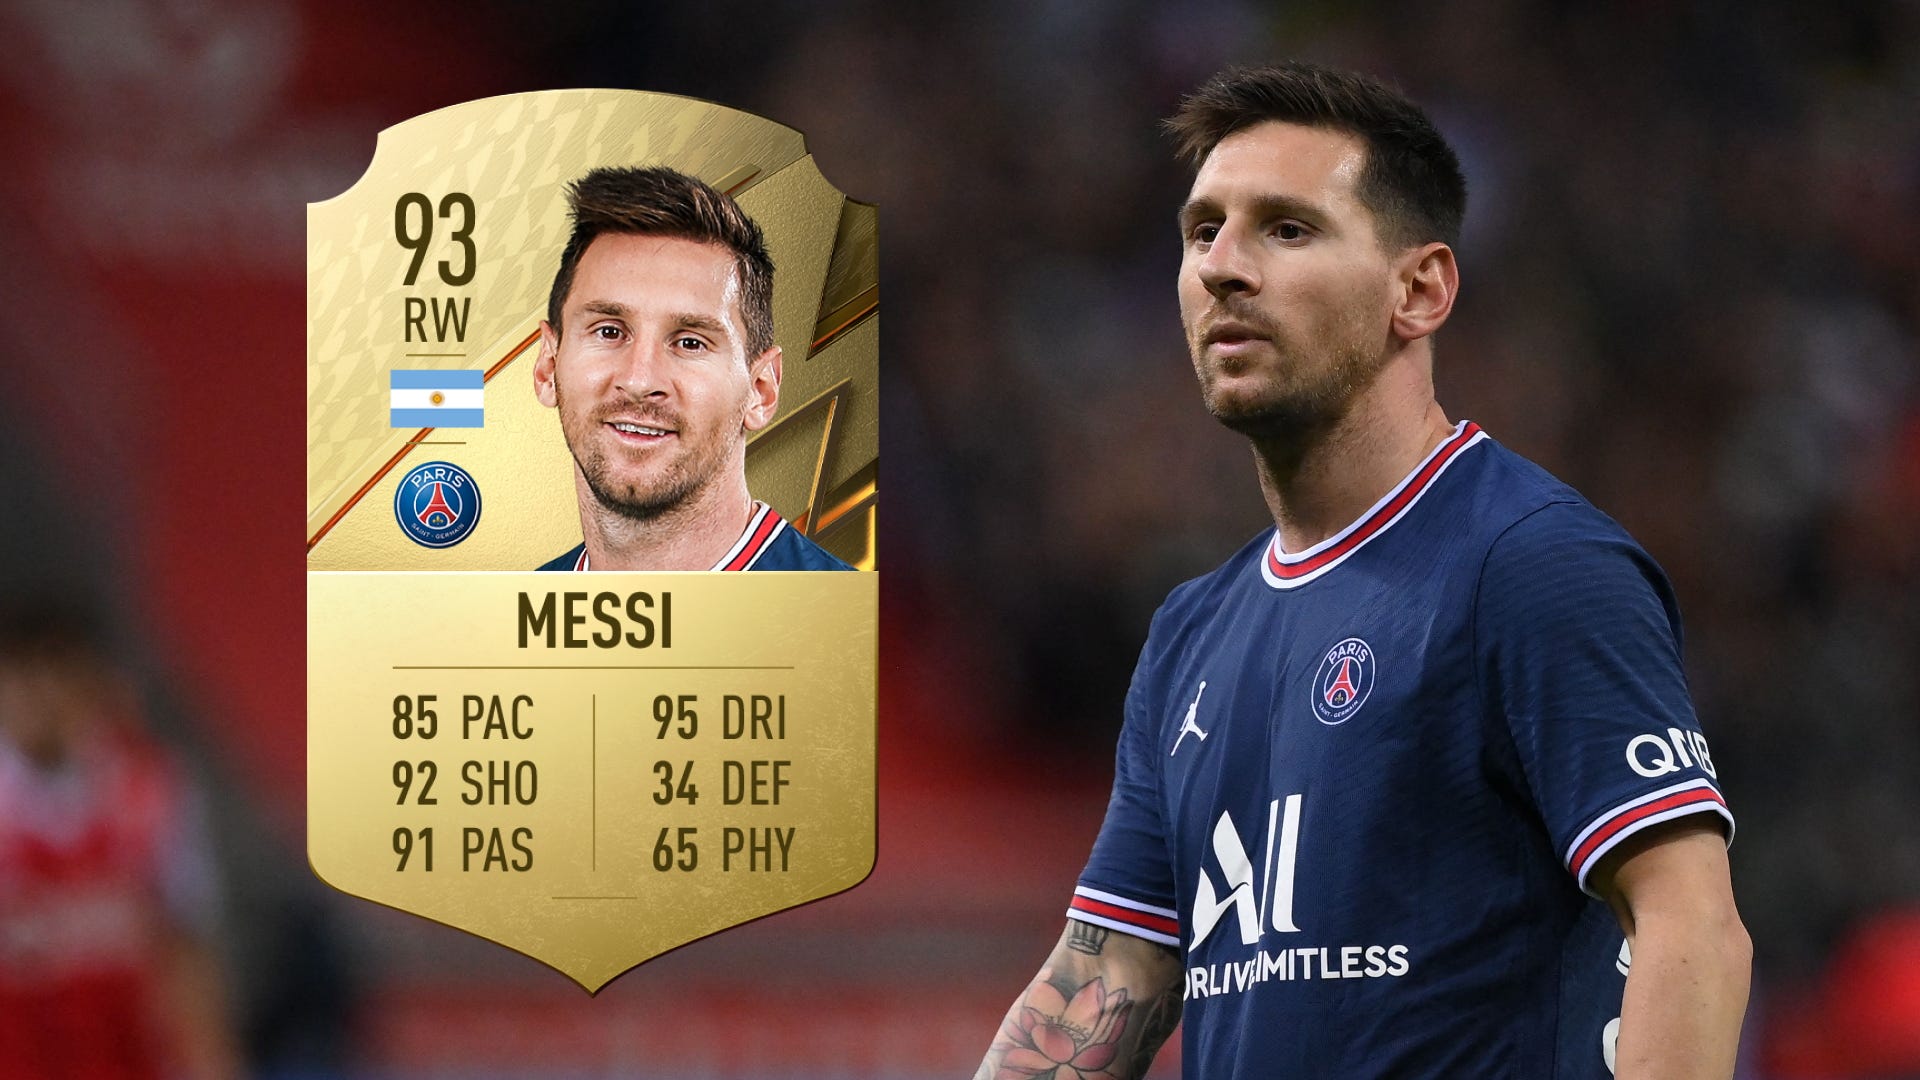 FIFA 22 ratings: Messi confirmed as best player as PSG star edges Ronaldo to top spot | Goal.com